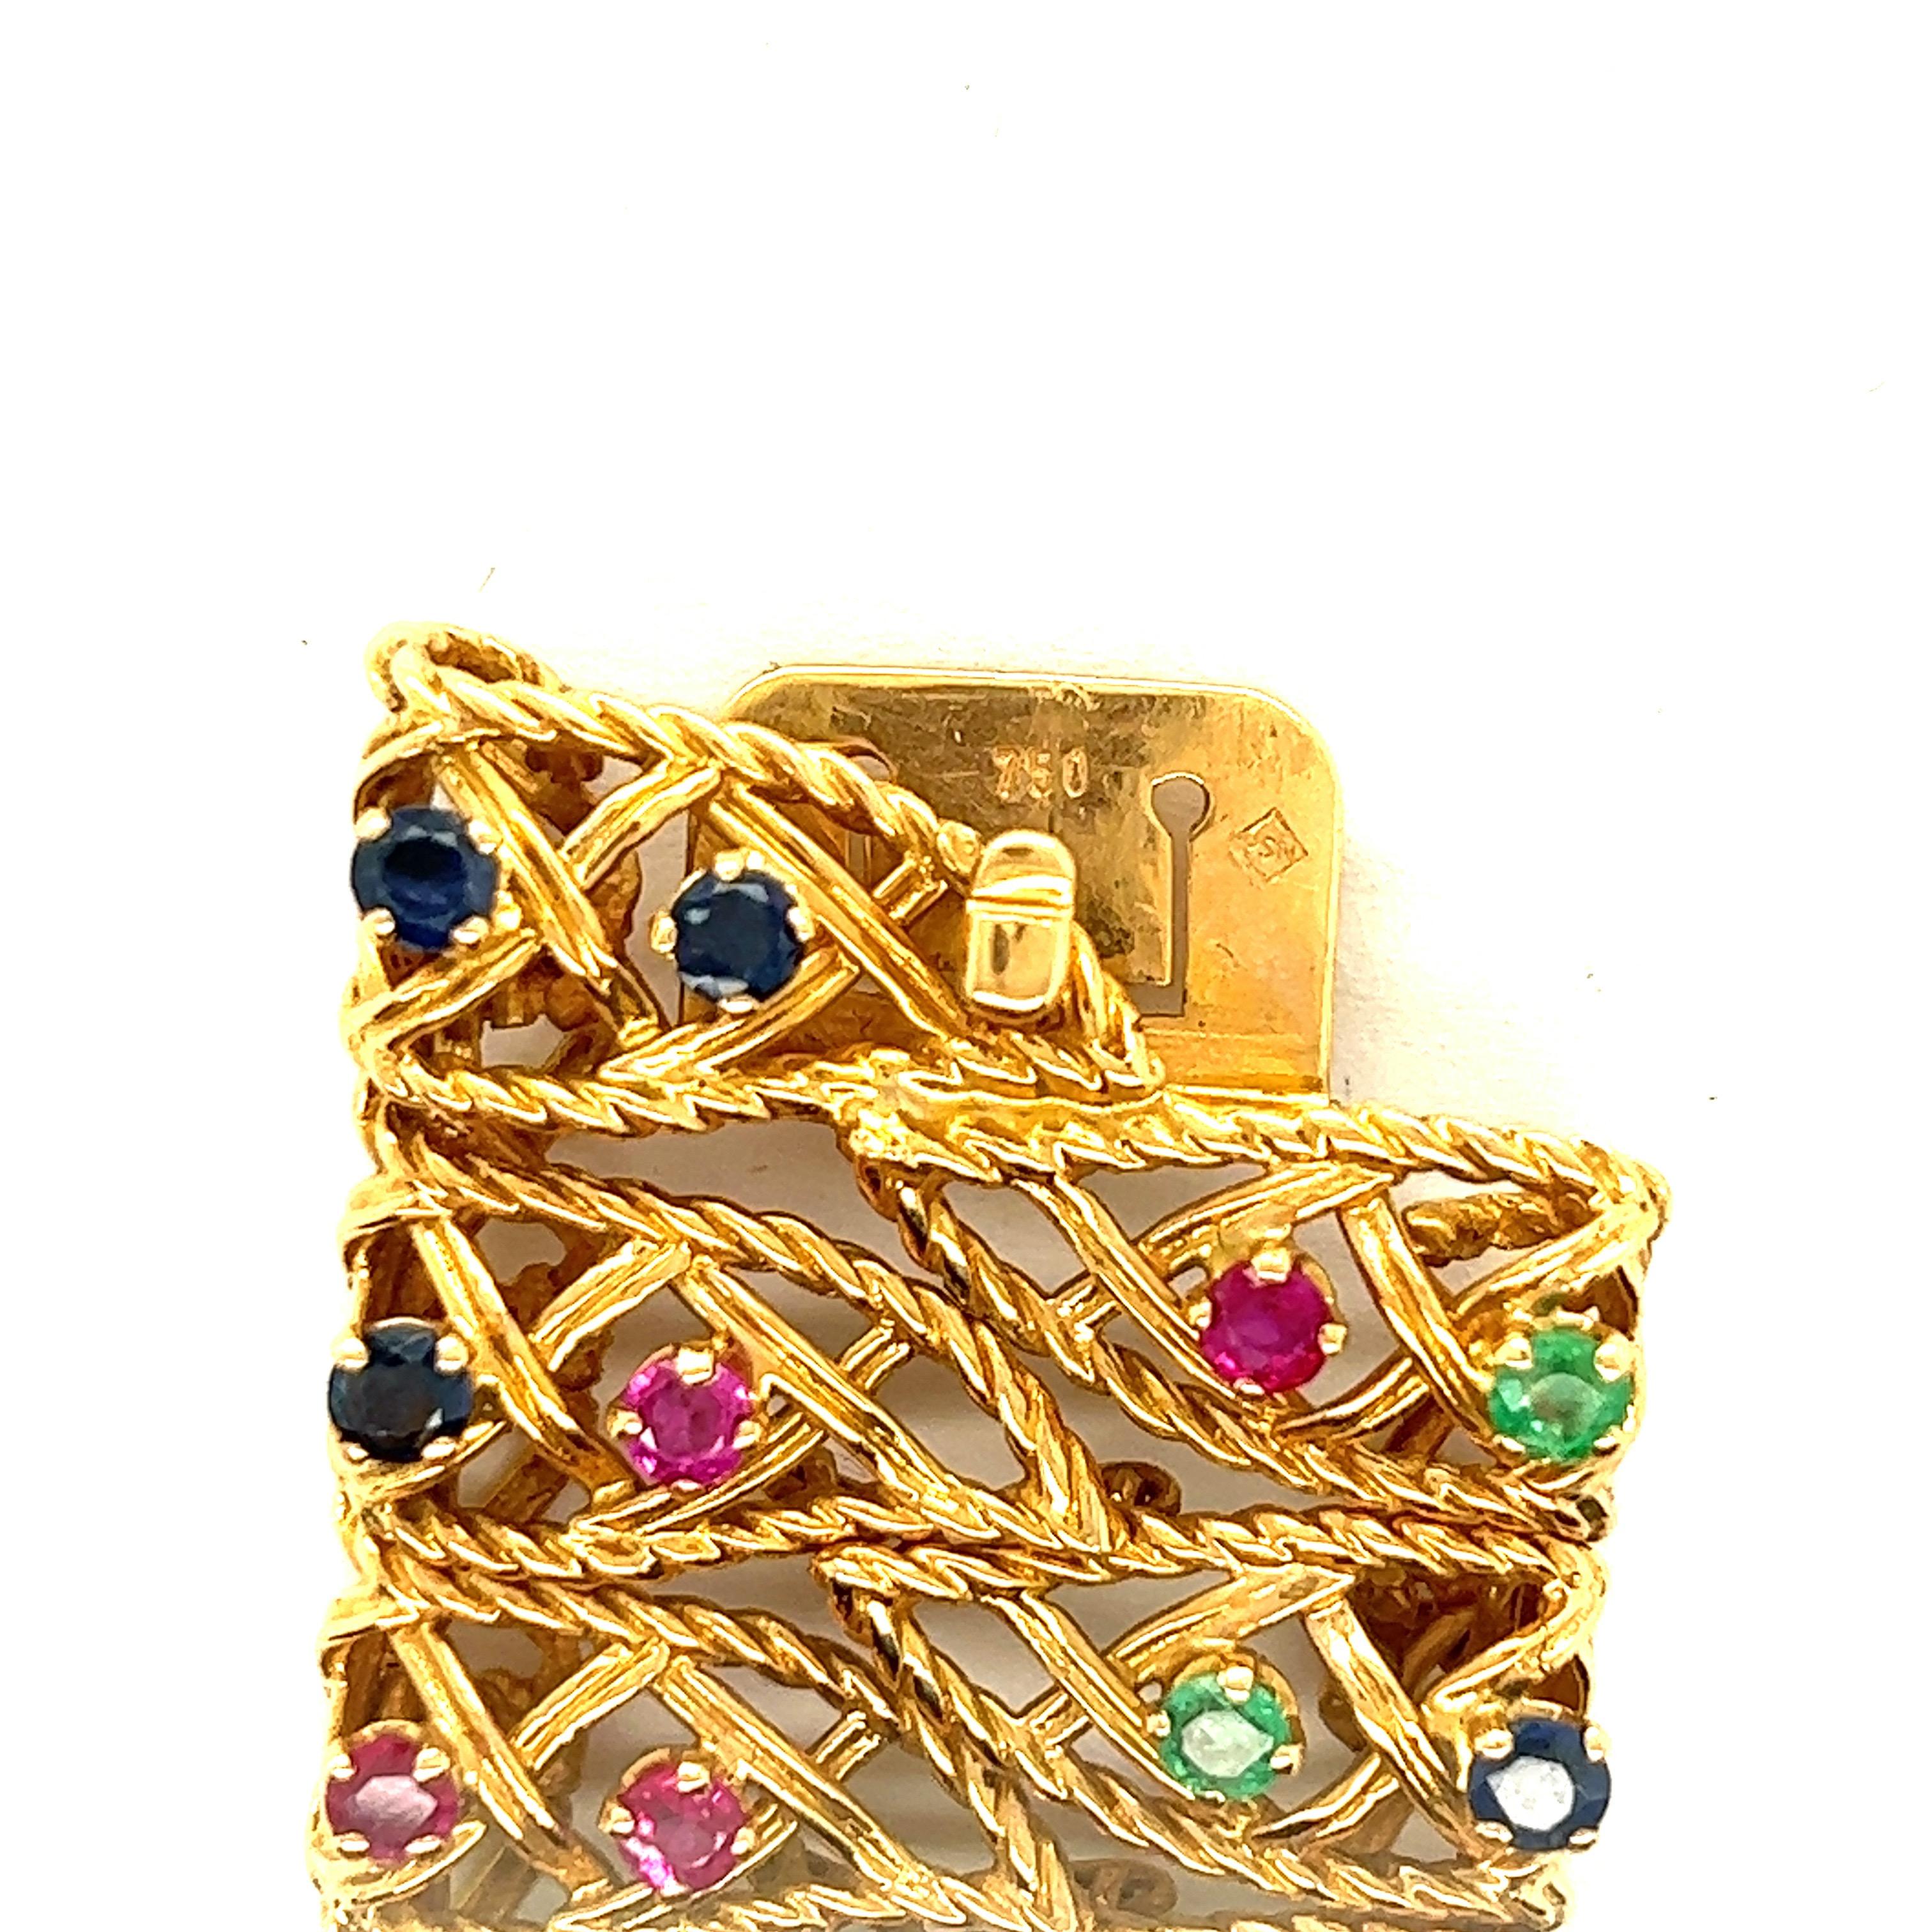 Gold, Ruby, Sapphire and Emerald Bracelet For Sale 2